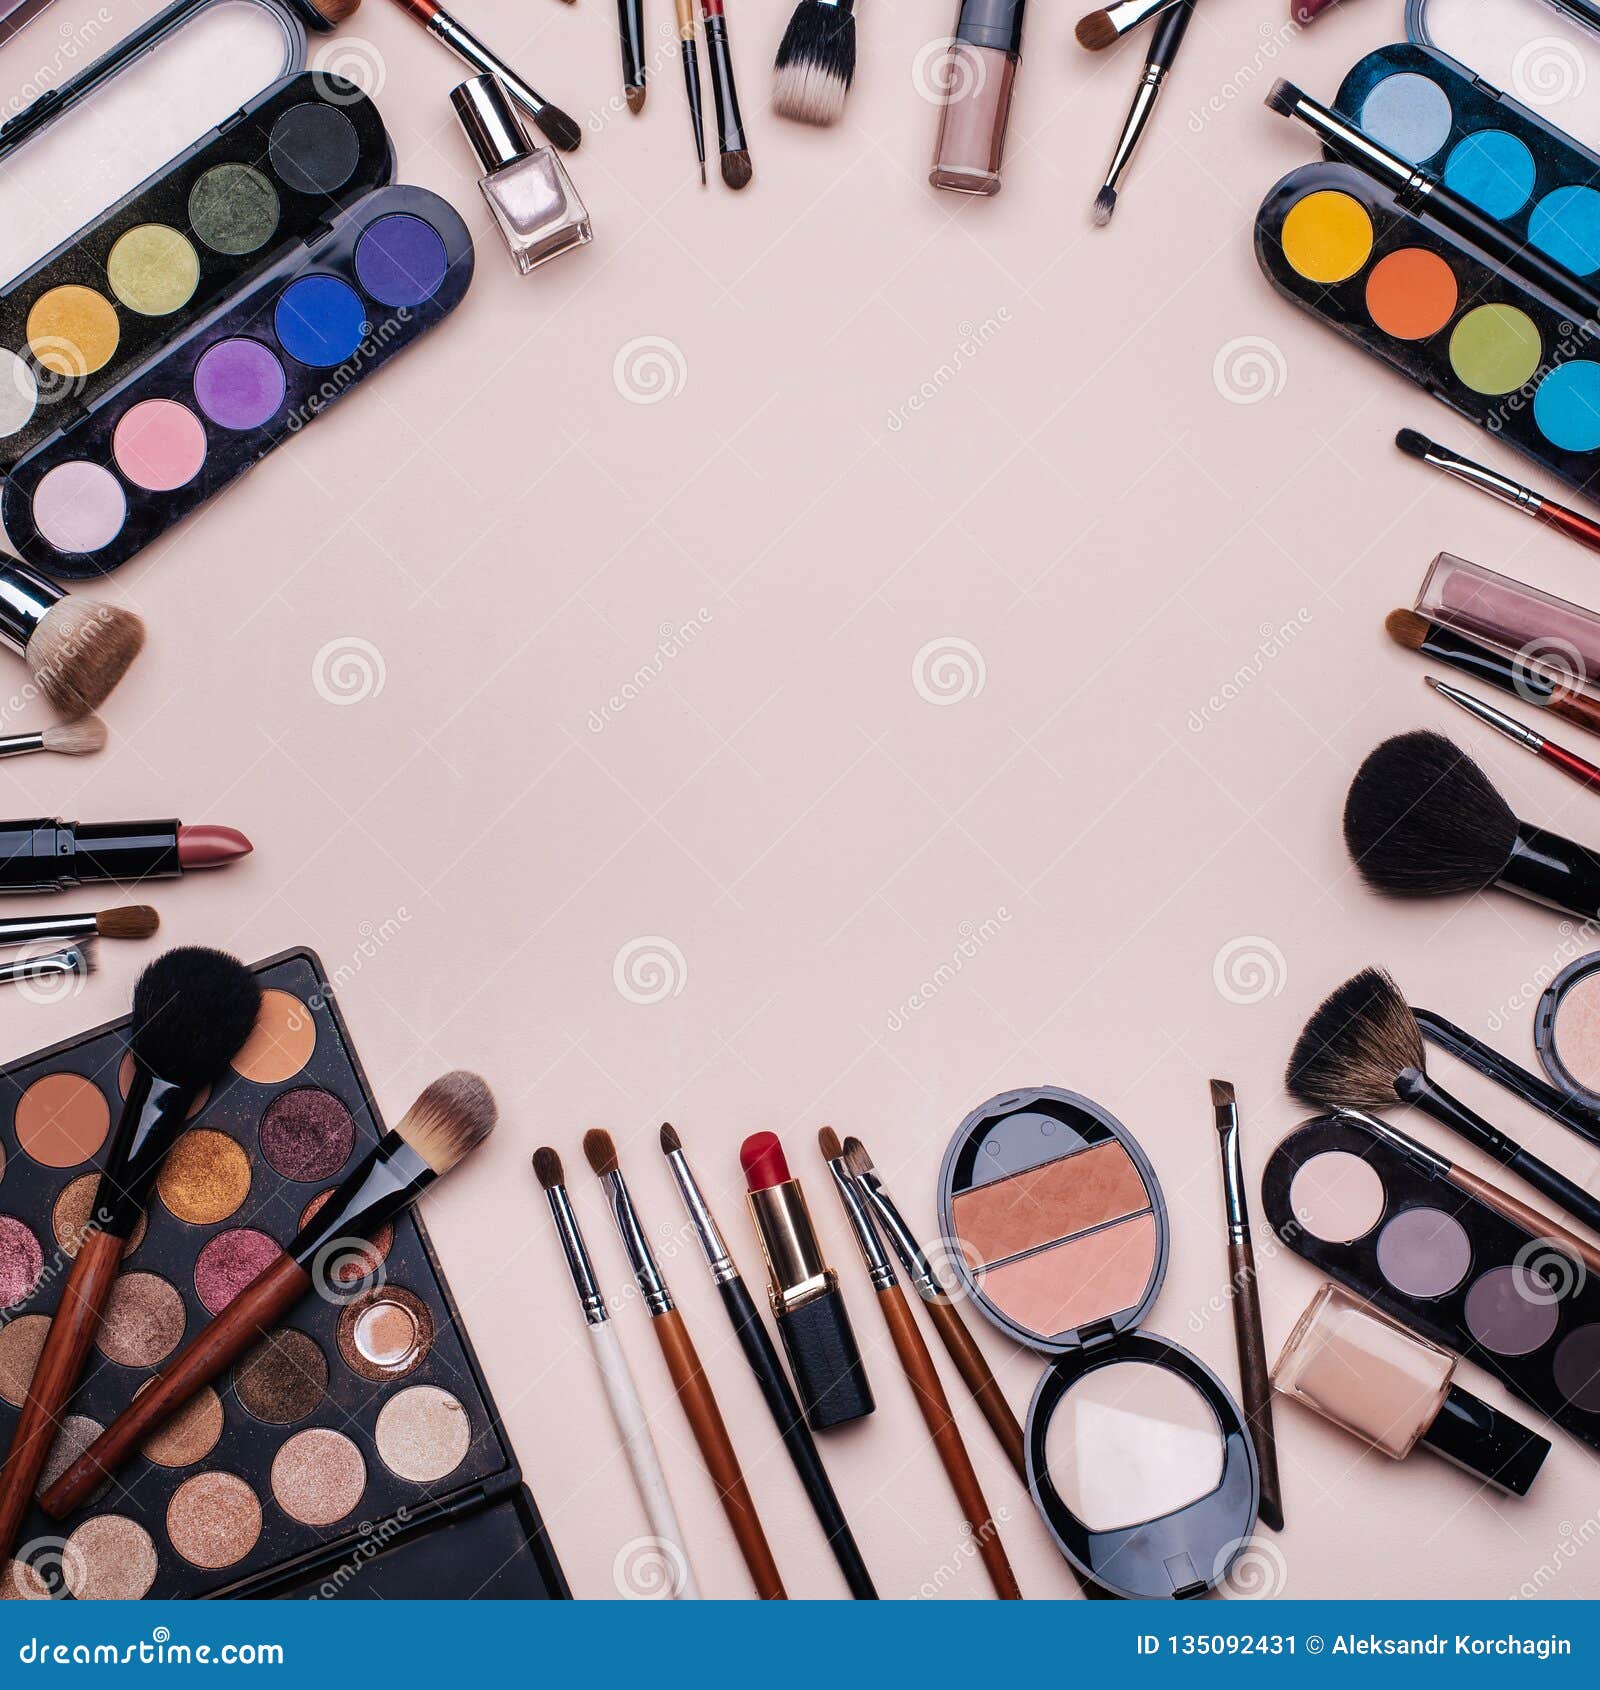 of Professional Cosmetics, Makeup Tools and Accessories for Women`s Stock Image - Image of lipstick, eyemakeup: 135092431